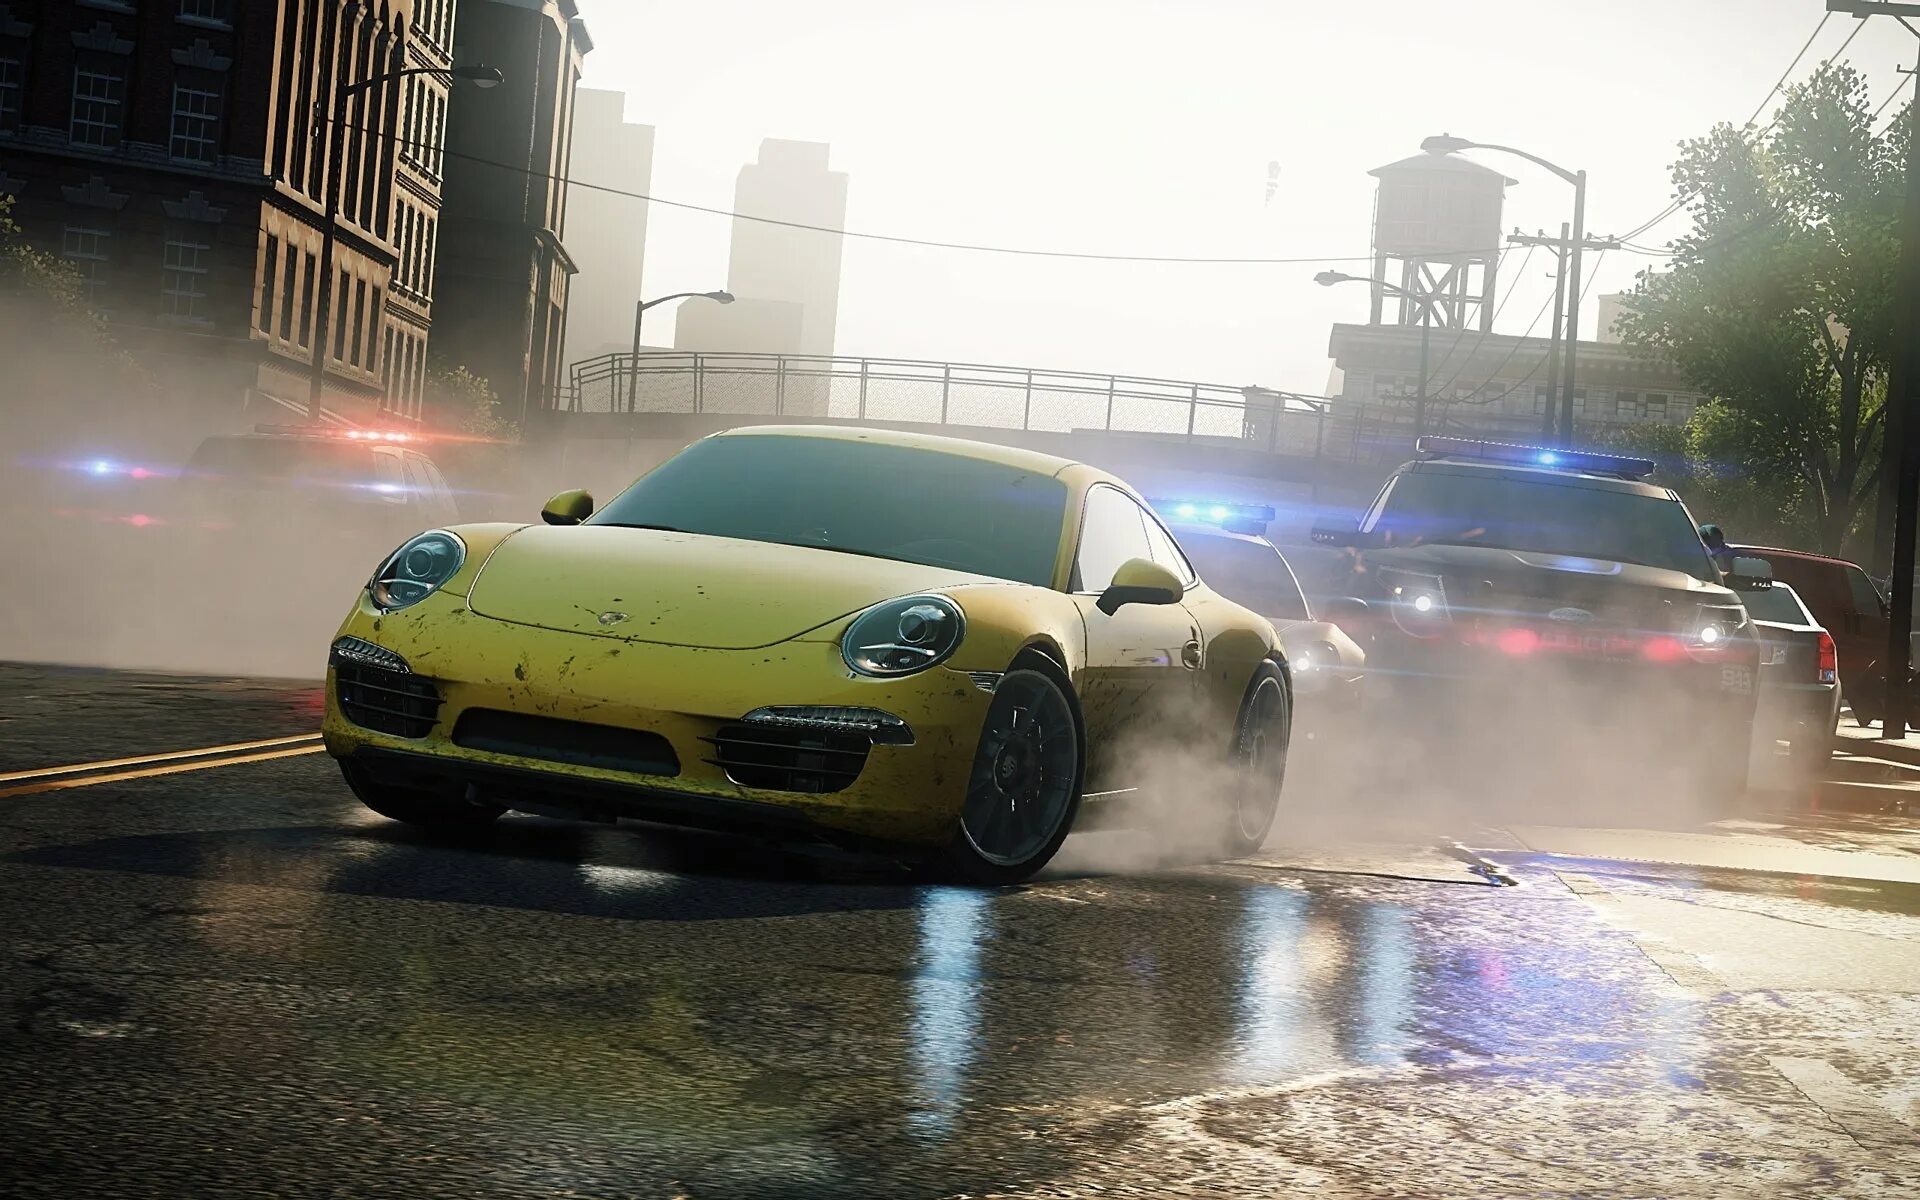 Need download. Нфс most wanted 2012. Most wanted 2012 погоня. Need for Speed (игра, 2015). Porsche 911 Carrera s NFS most wanted 2012.